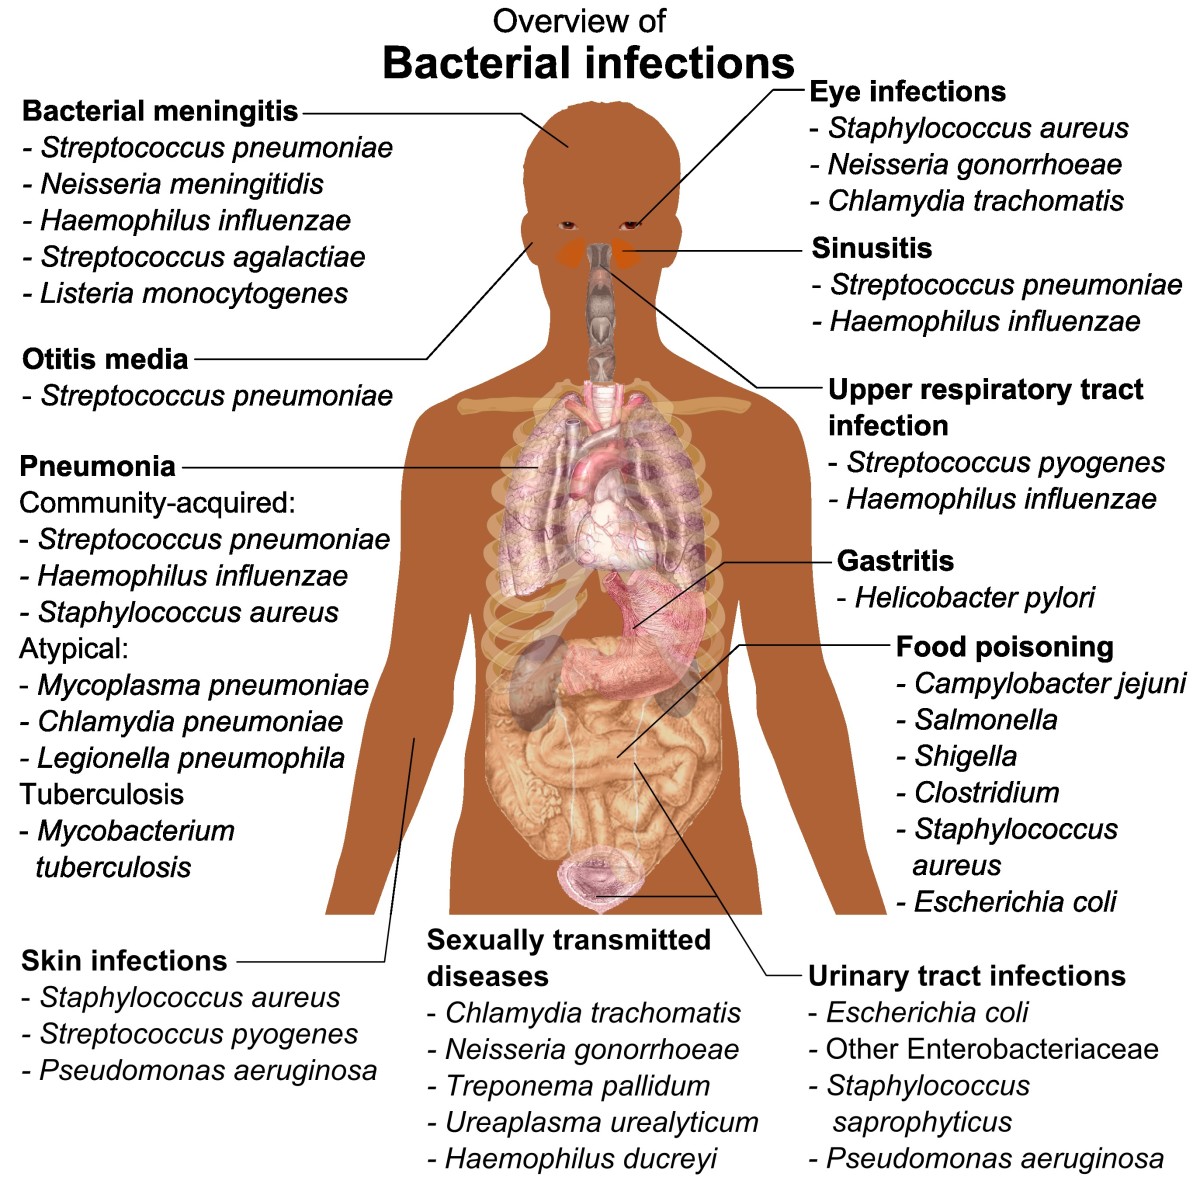 Bacterial infections that can be treated by Enhancin